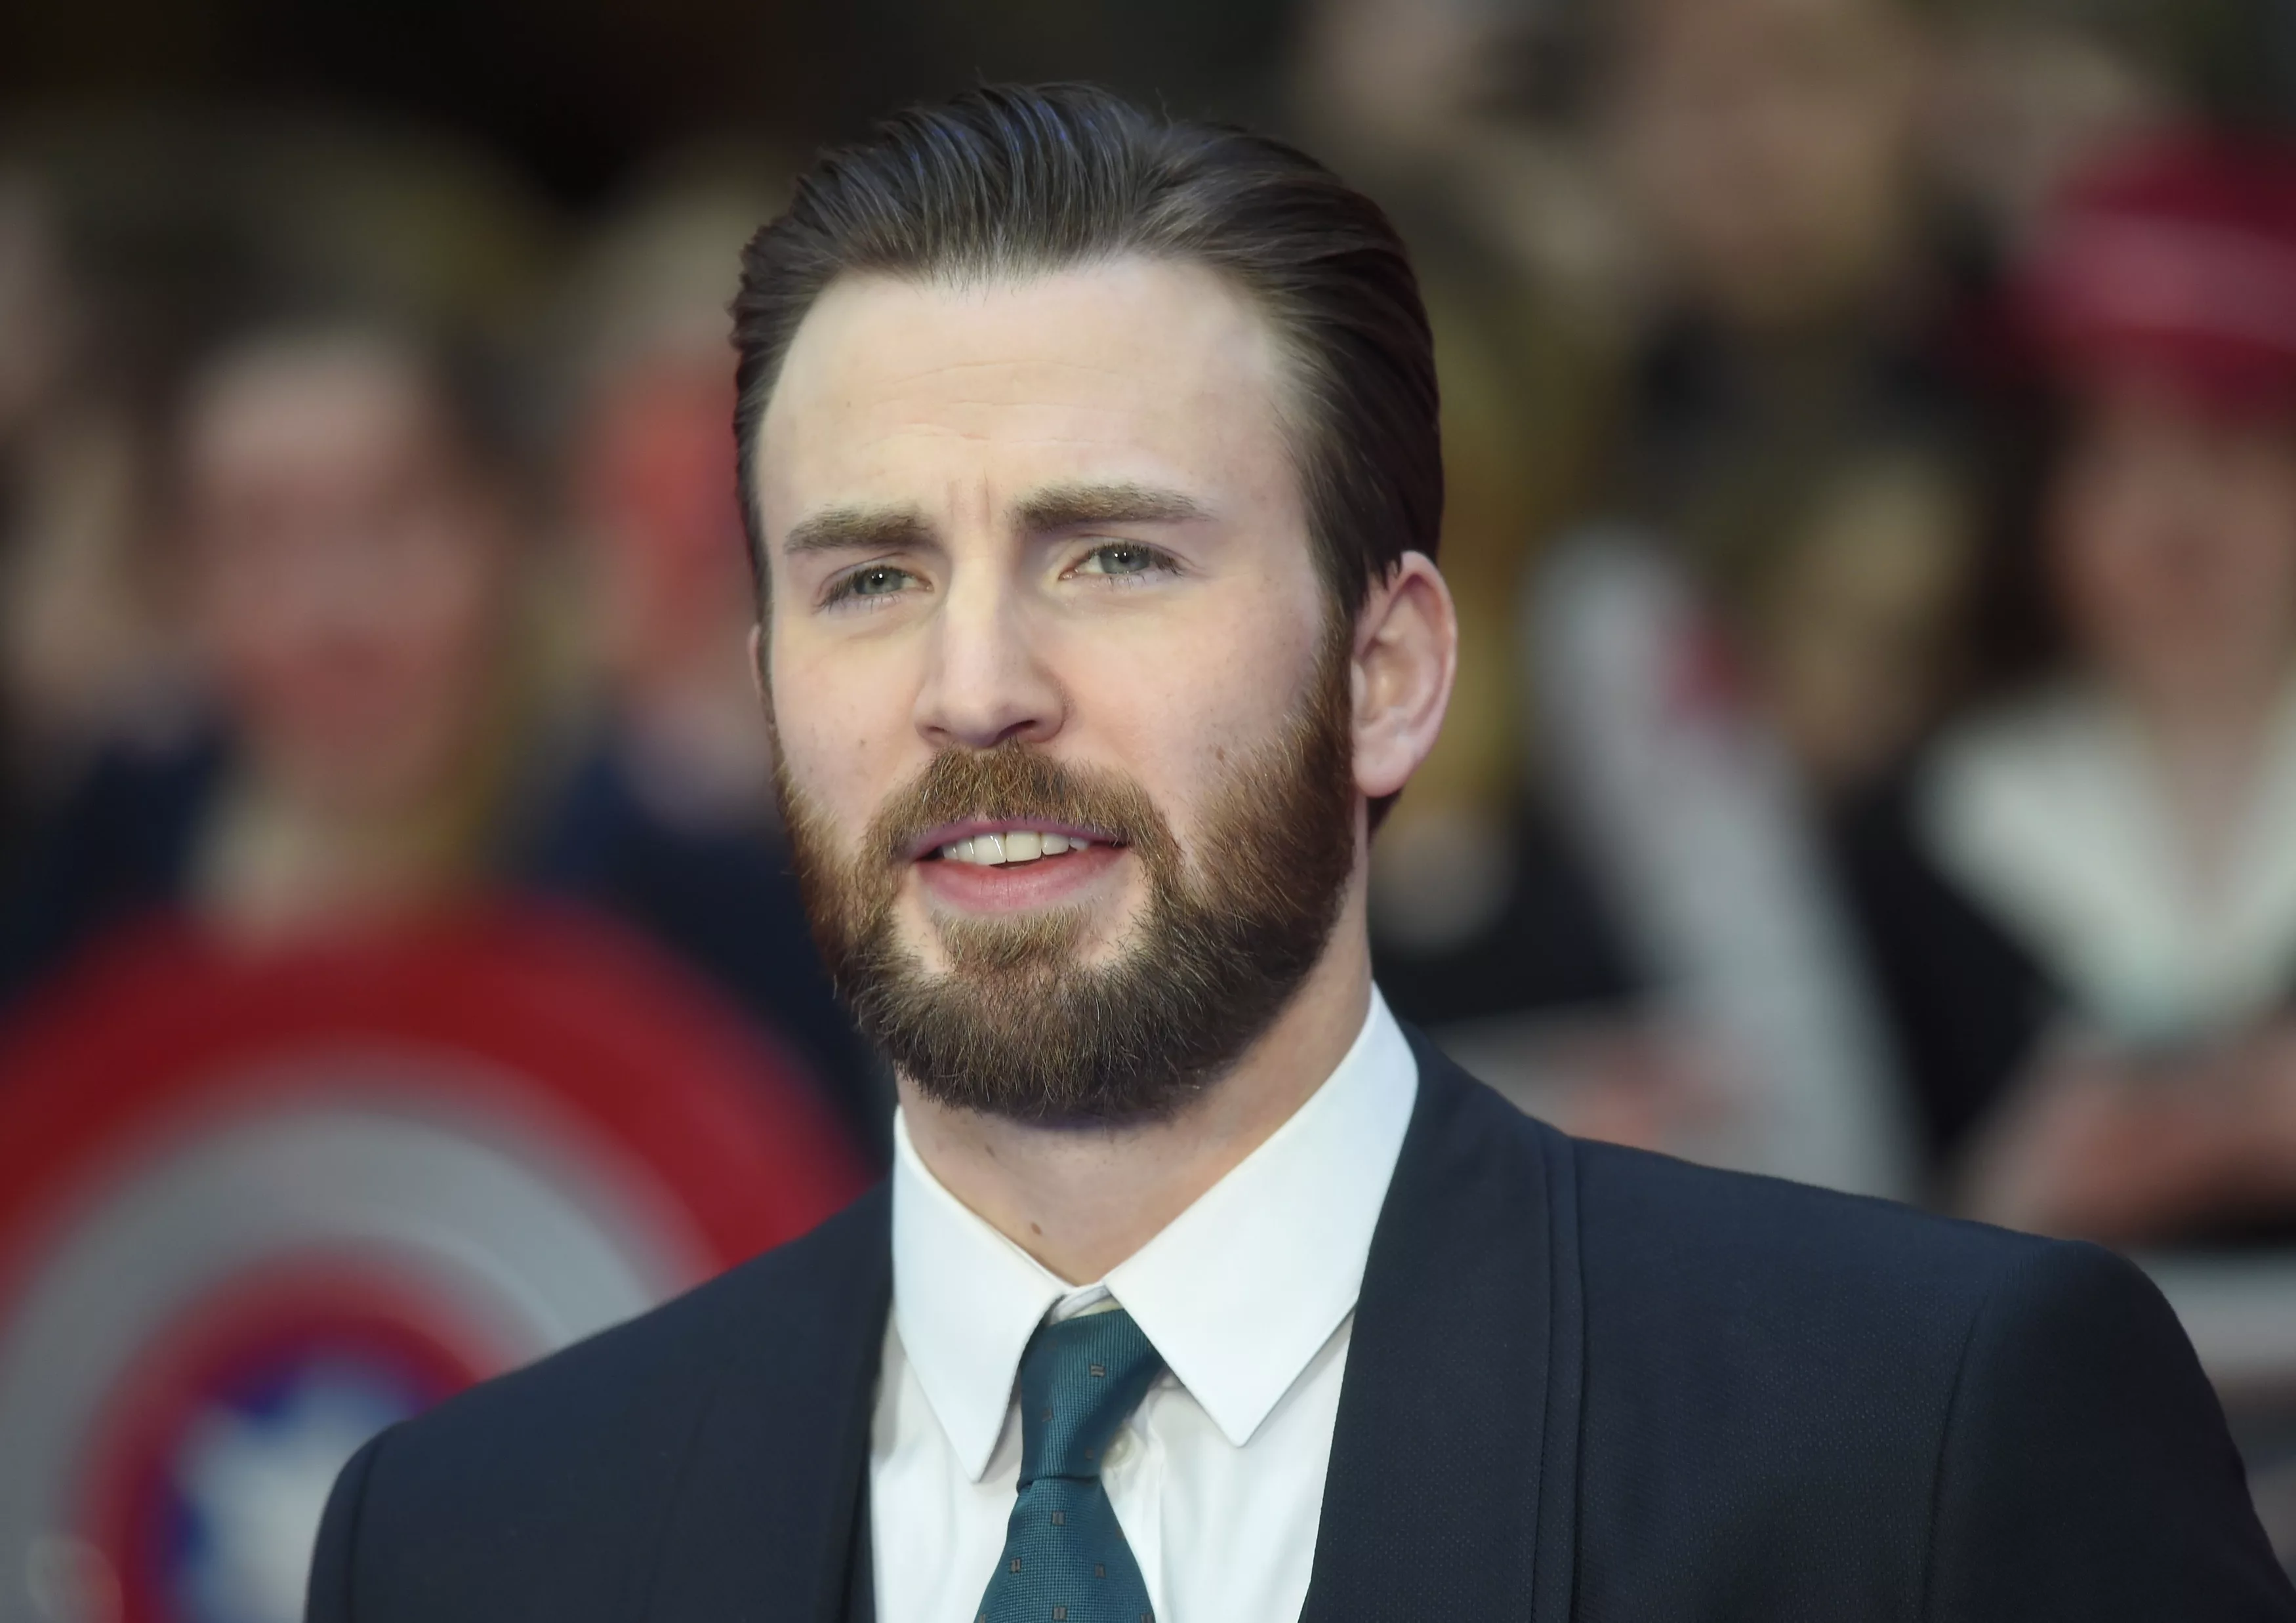 actor-chris-evans-arrives-at-the-european-premiere-of-captain-america-civil-war-at-a-shopping-centre-in-east-london-britain